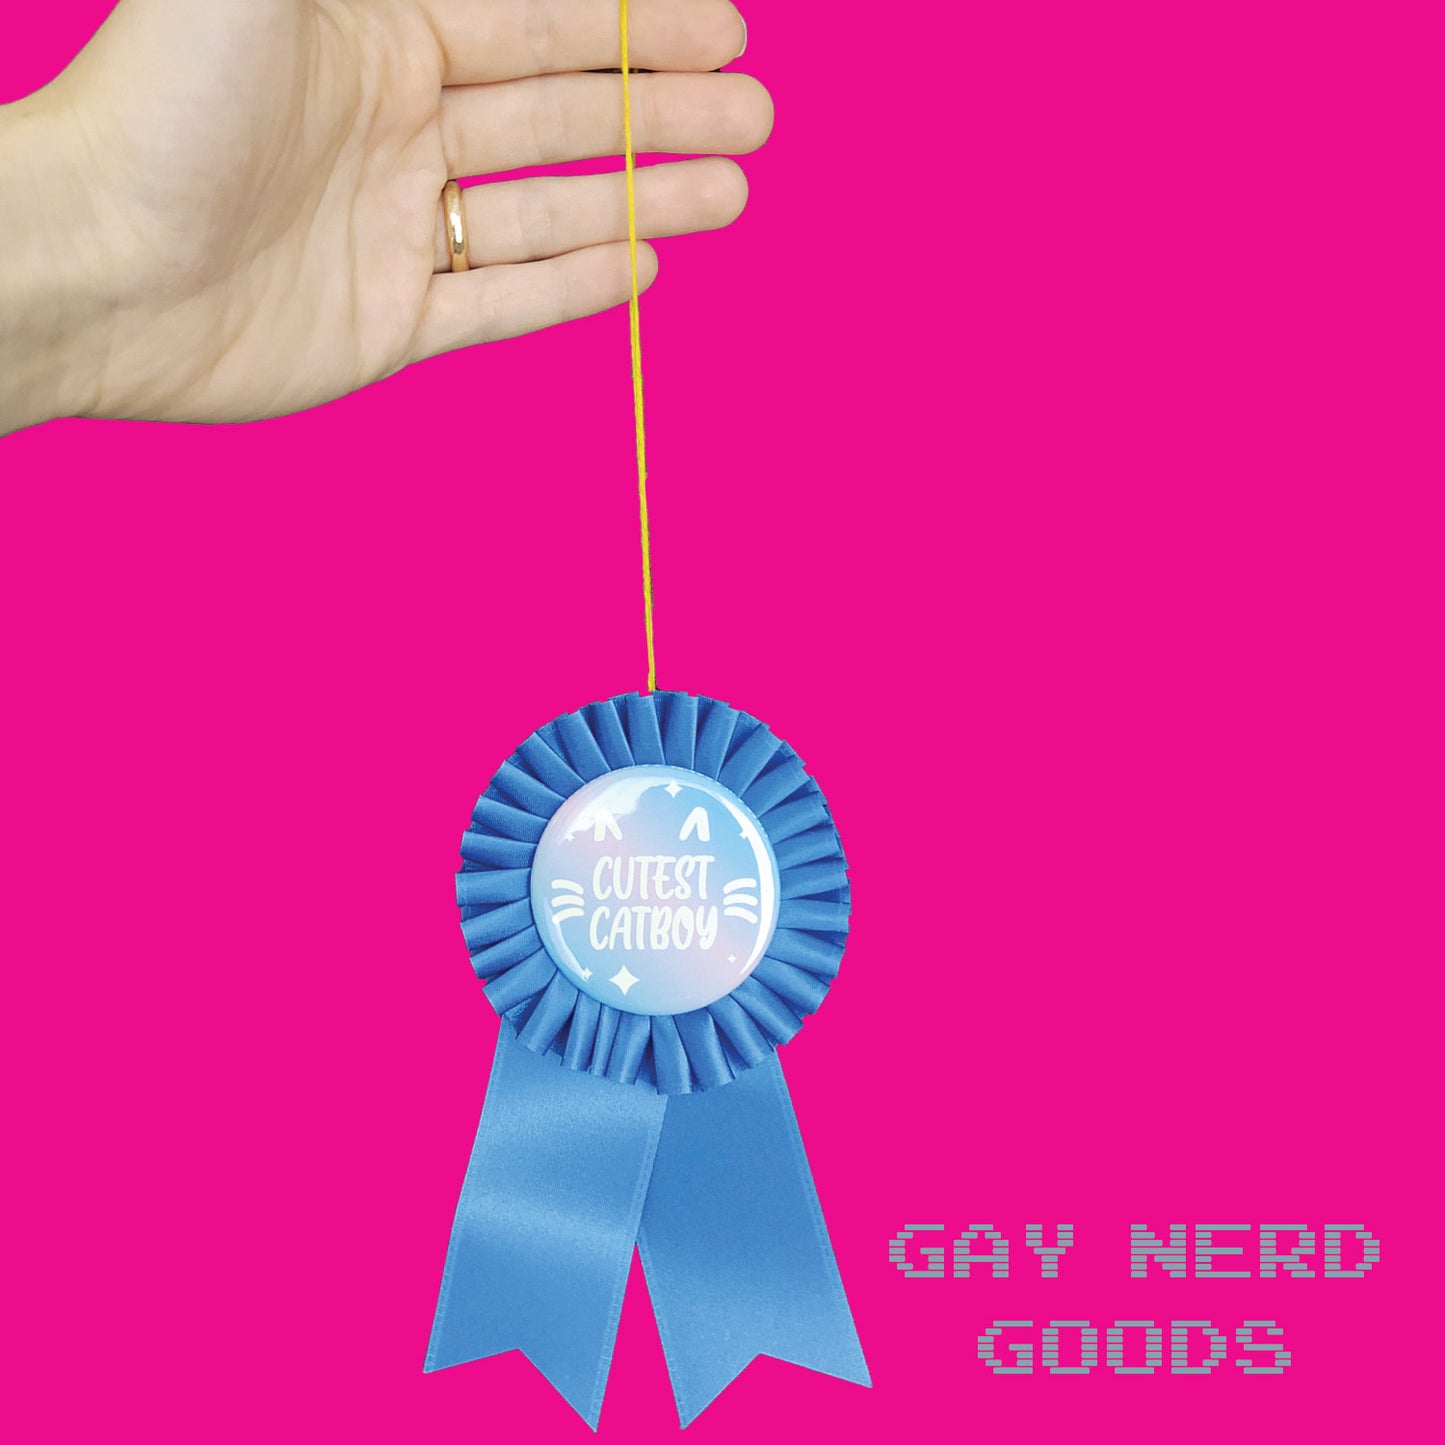 hand holding the blue "cutest catboy" award ribbon by its thread loop against a pink background